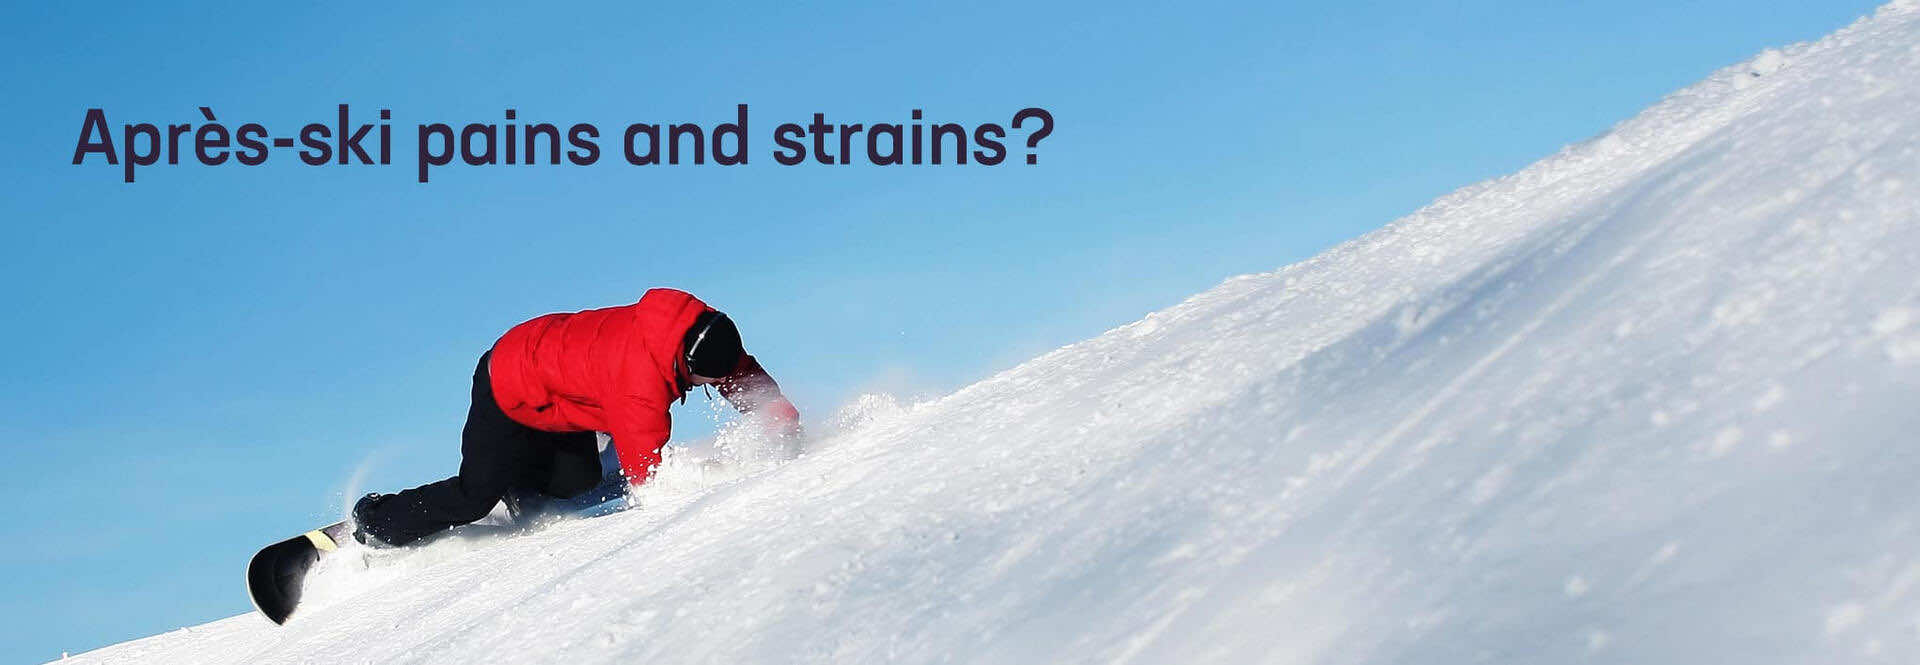 Skiier falling in the snow| Skiing injuries | London Doctors Clinic